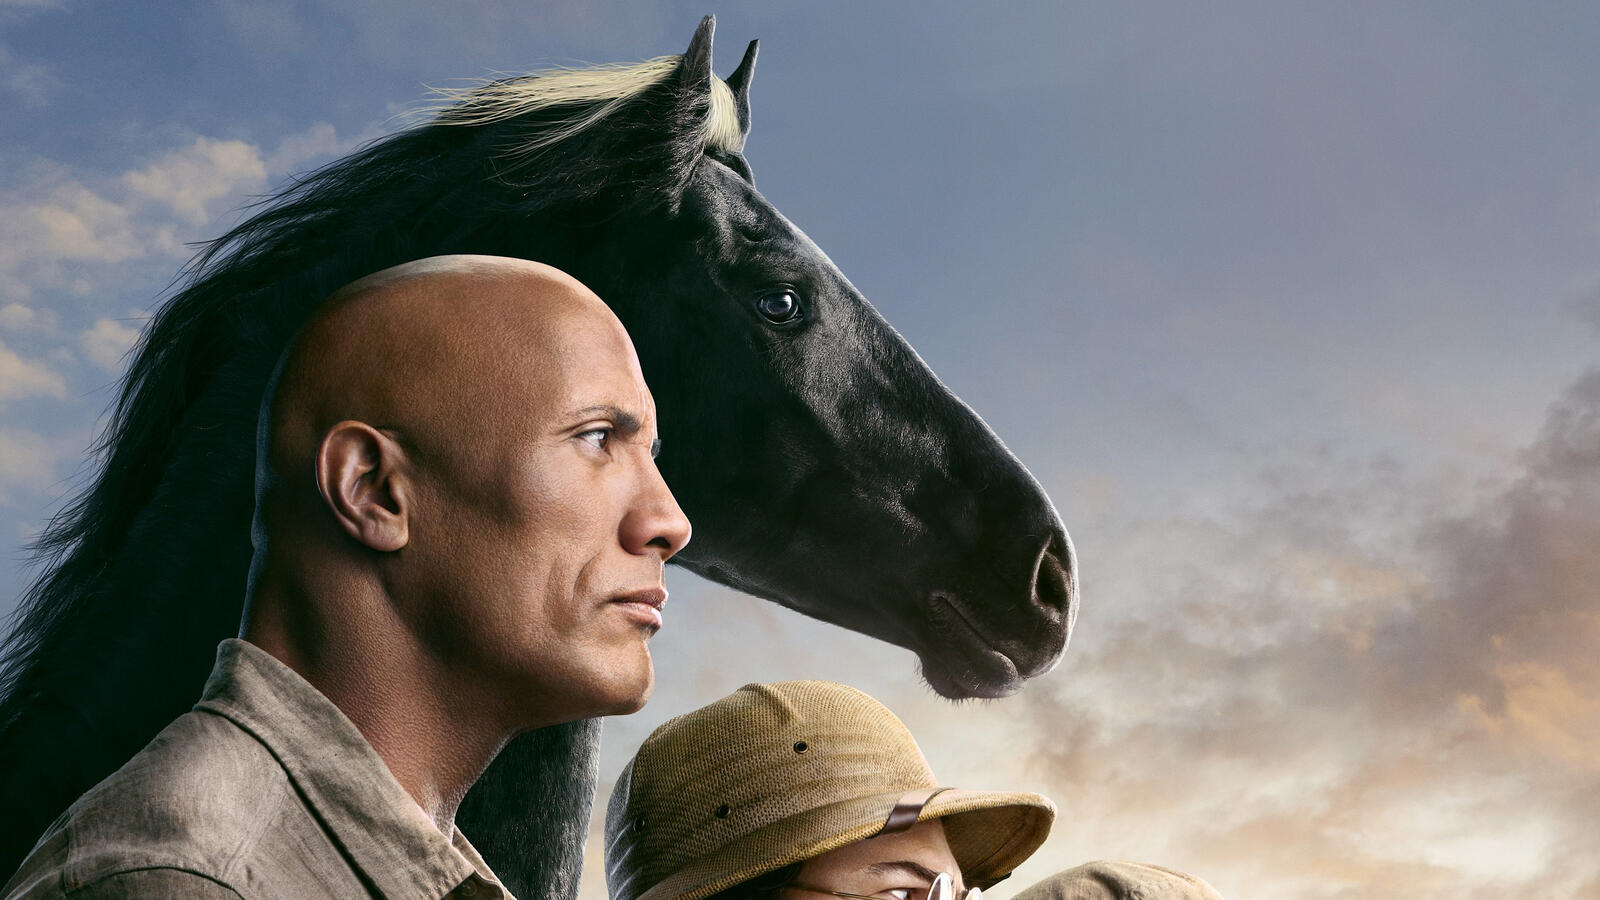 Wallpapers Jumanji The Next Level steed 2019 Movies on the desktop